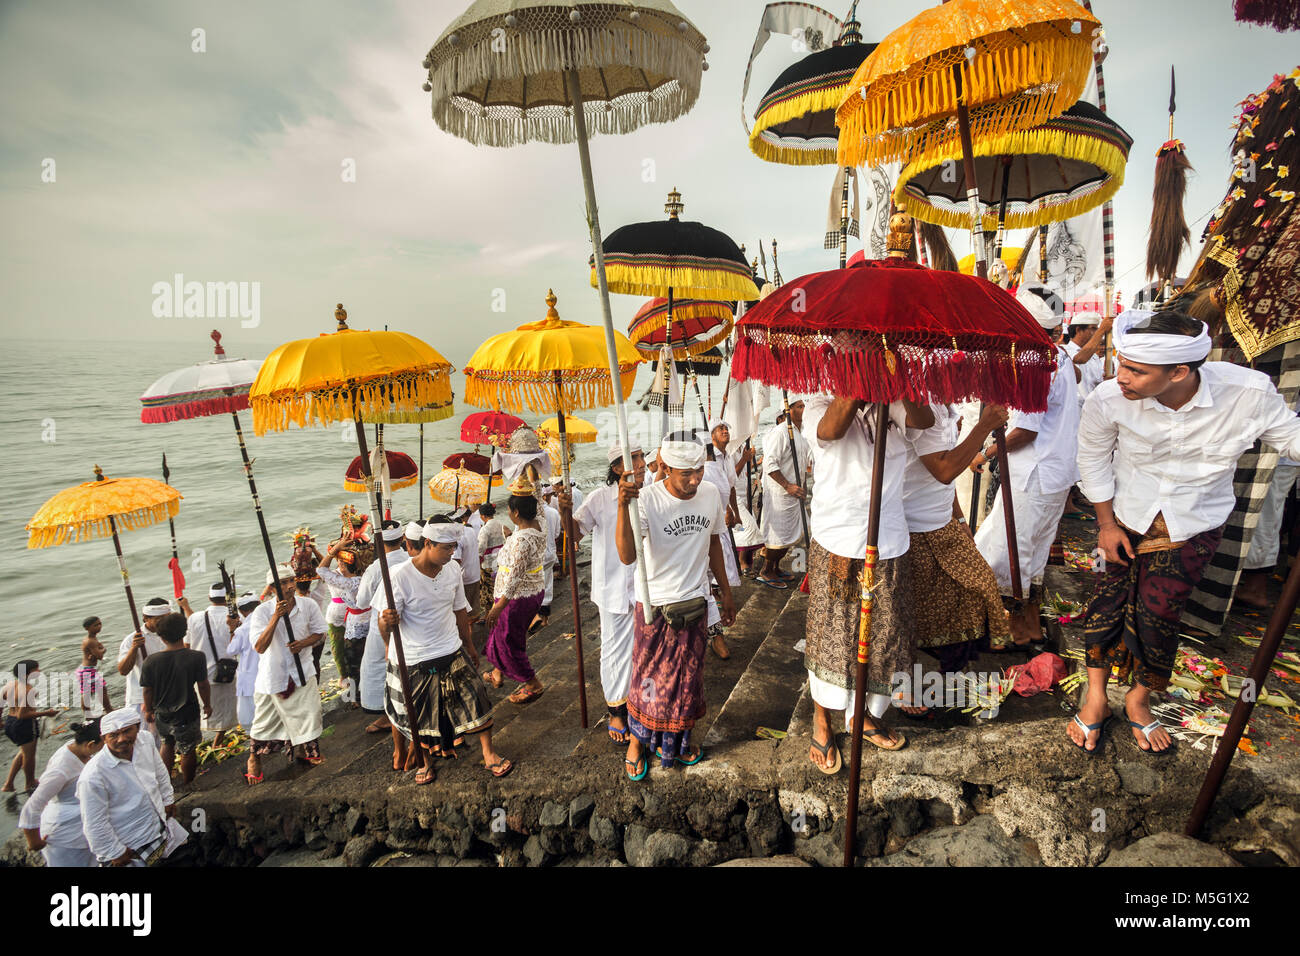 Religious gathering and religious mass of Balinese Hindu's with colorful Religious parasols at Melasti Ceremony on a Bali beach. Traditional rituals Stock Photo